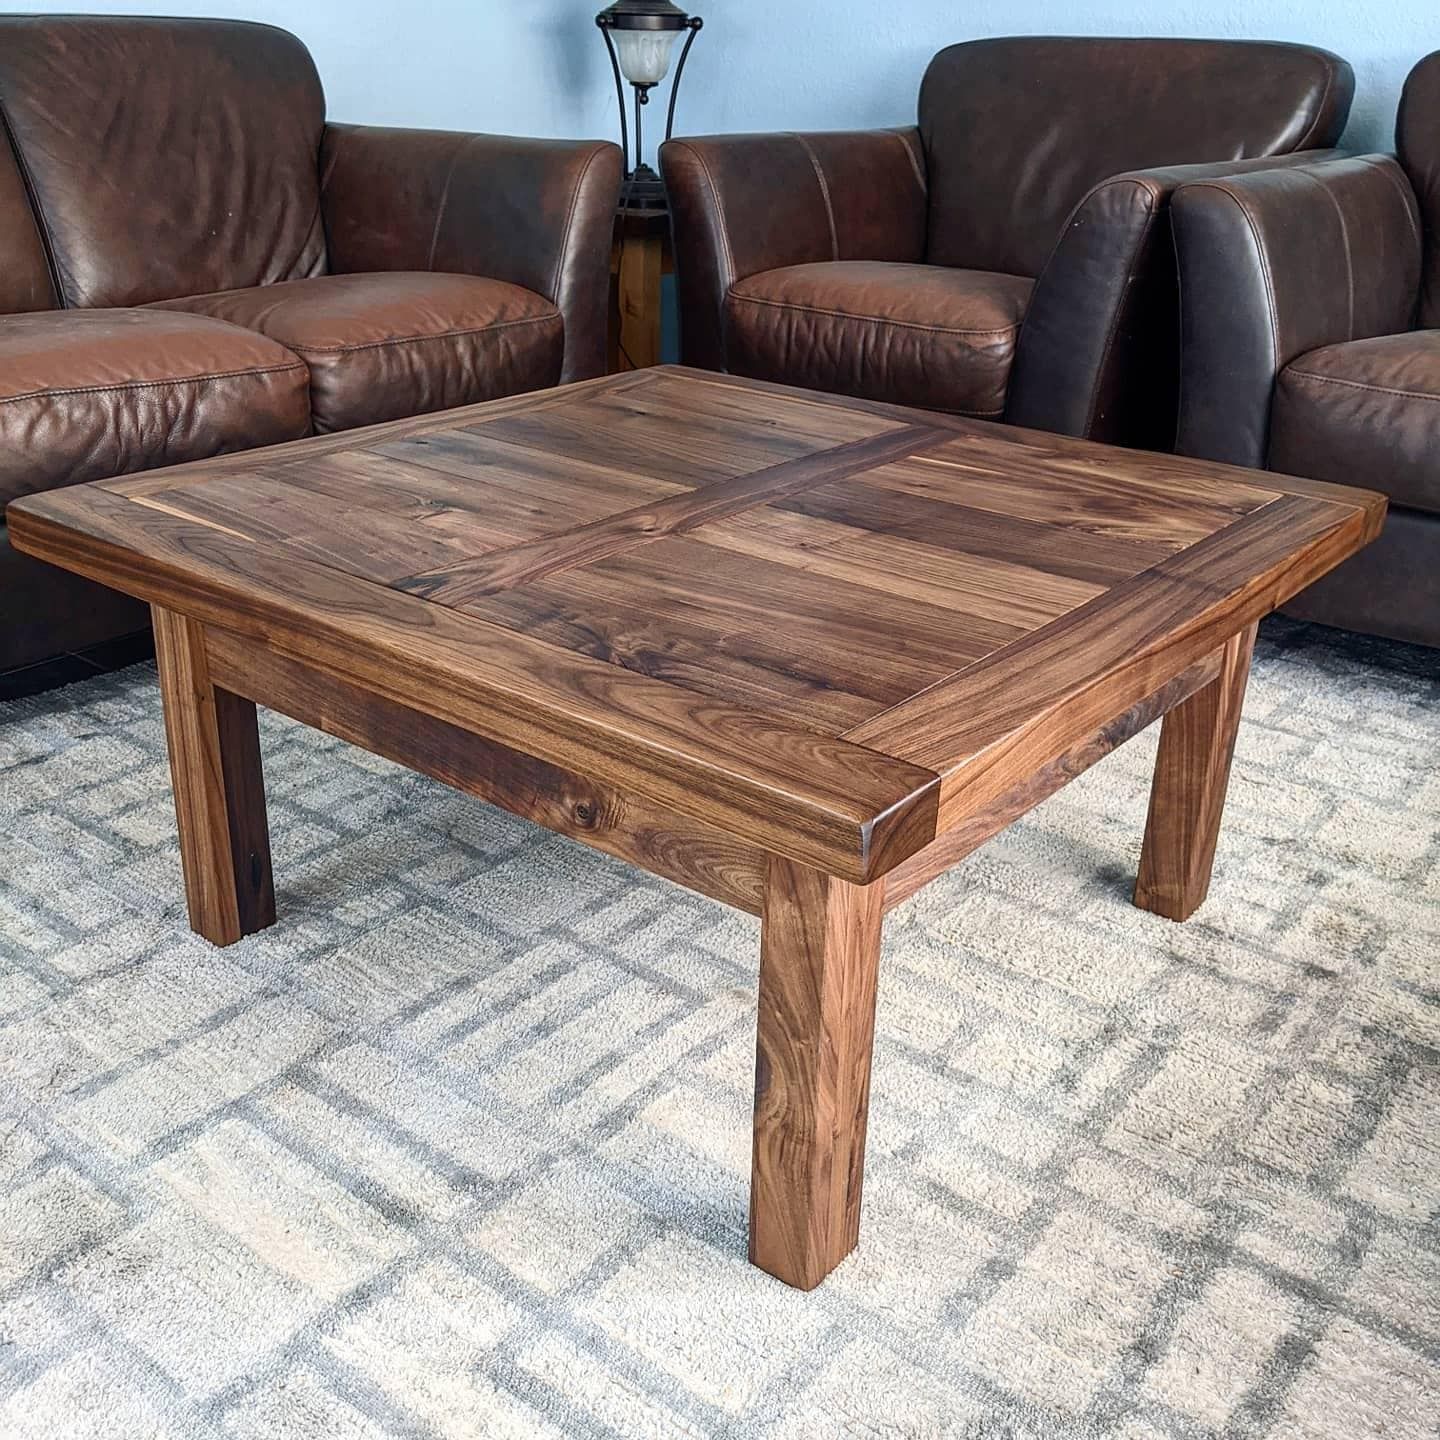 Walnut Coffee Table 3 Ft X 3 Ft Made With Solid Walnut – Etsy Inside Walnut Coffee Tables (View 7 of 20)